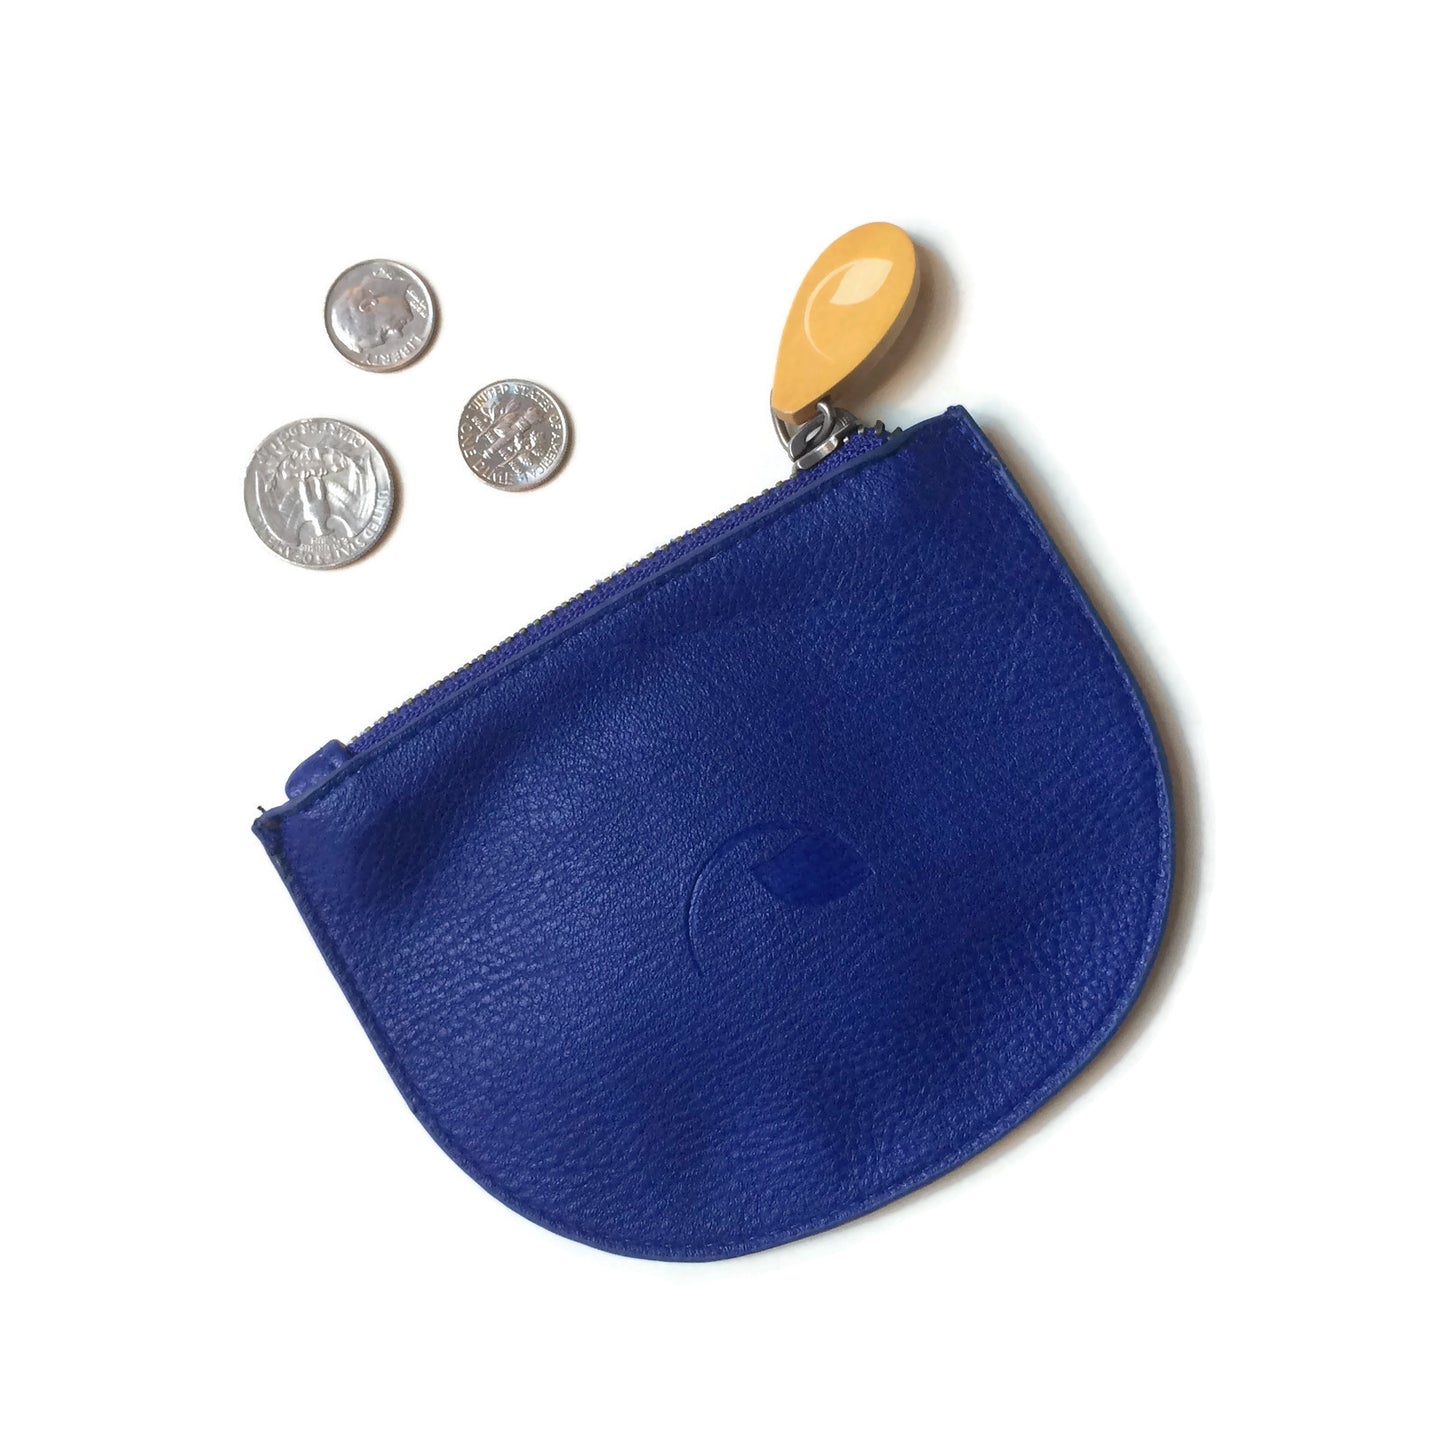 Coney Coin Purse in Vegan Leather - 5 colors